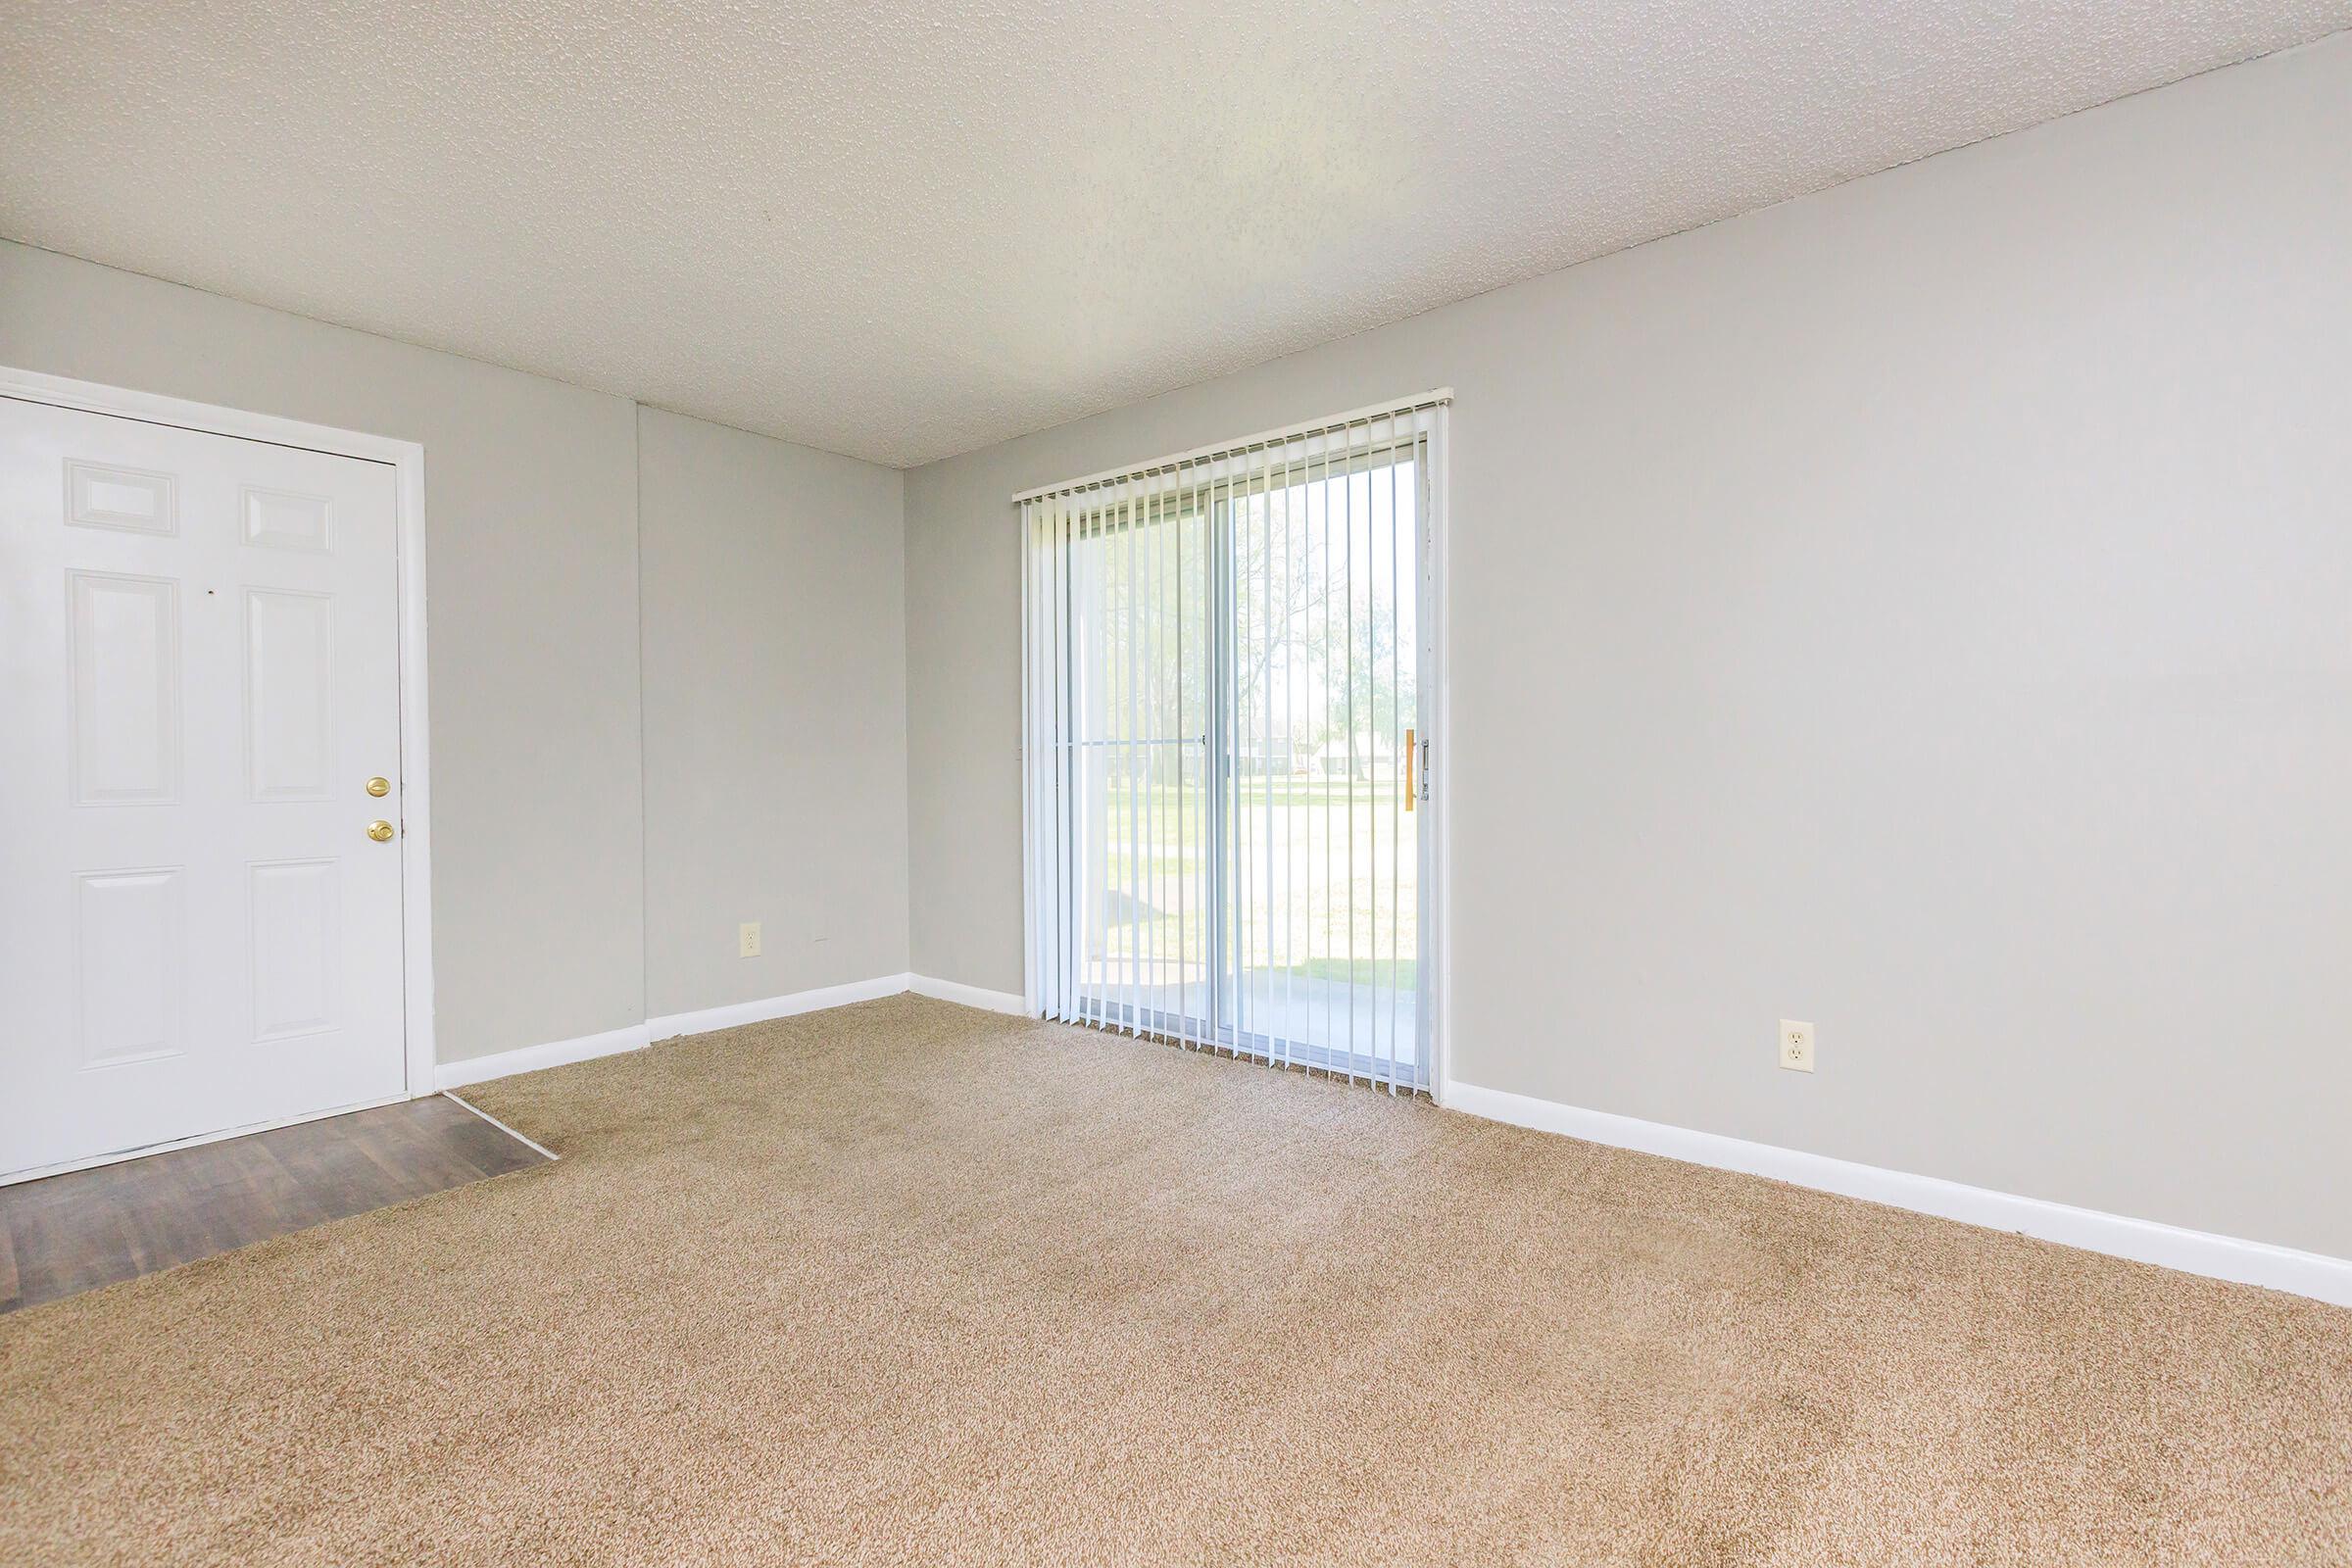 Carpeted living area in one bedroom apartment